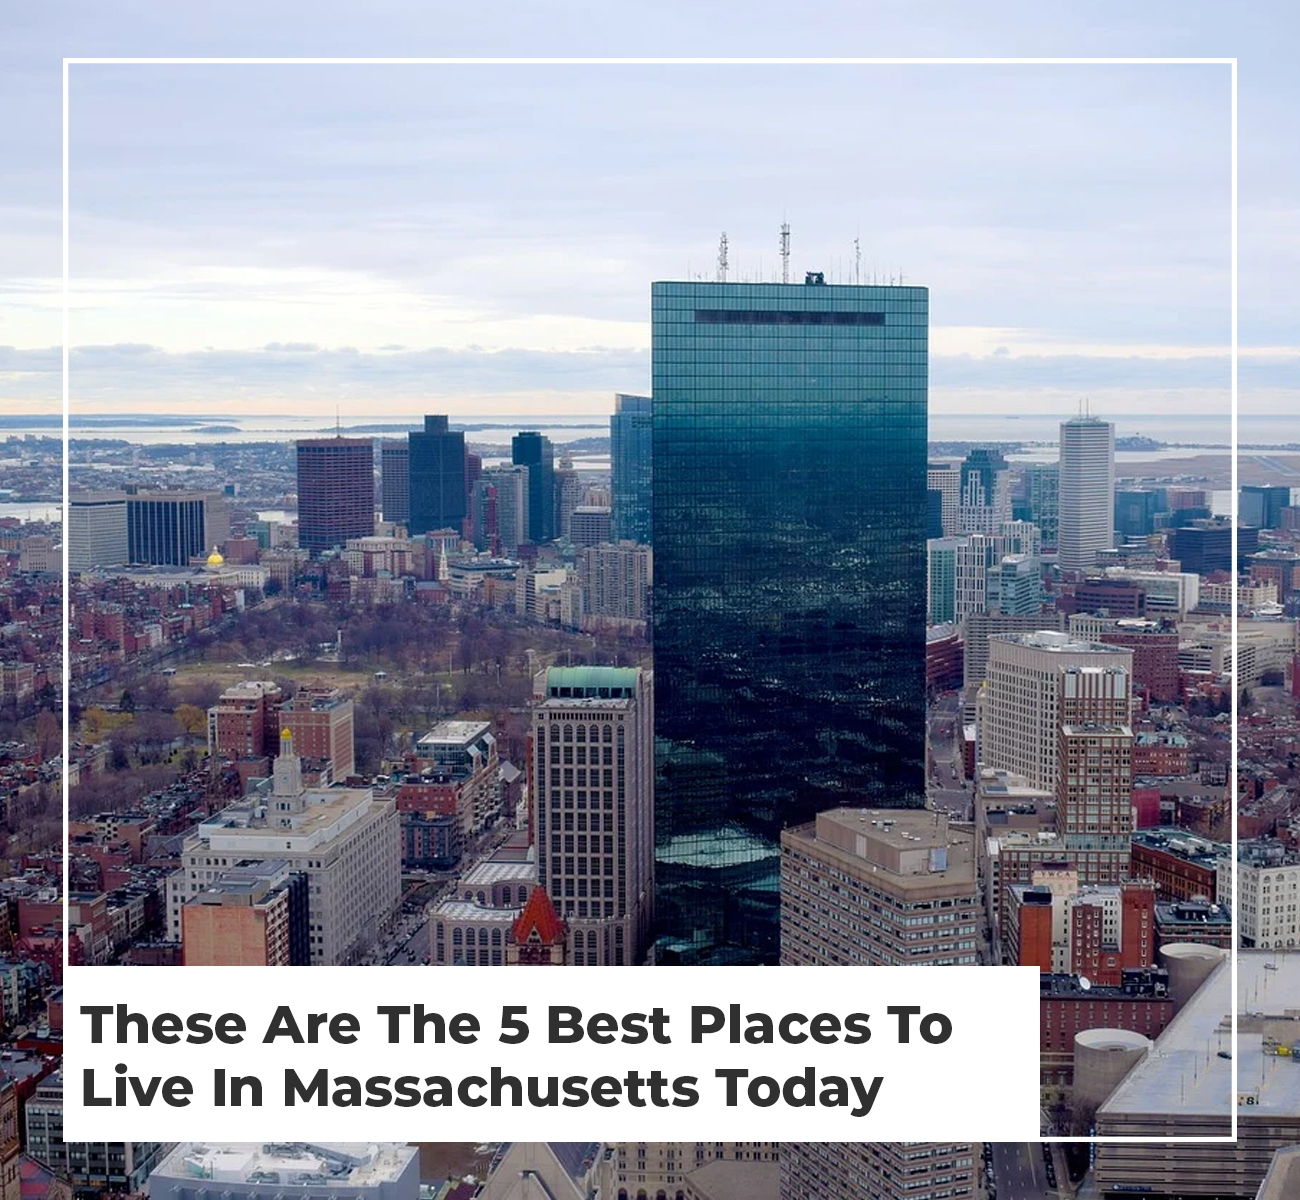 These Are The 5 Best Places To Live In Massachusetts Today